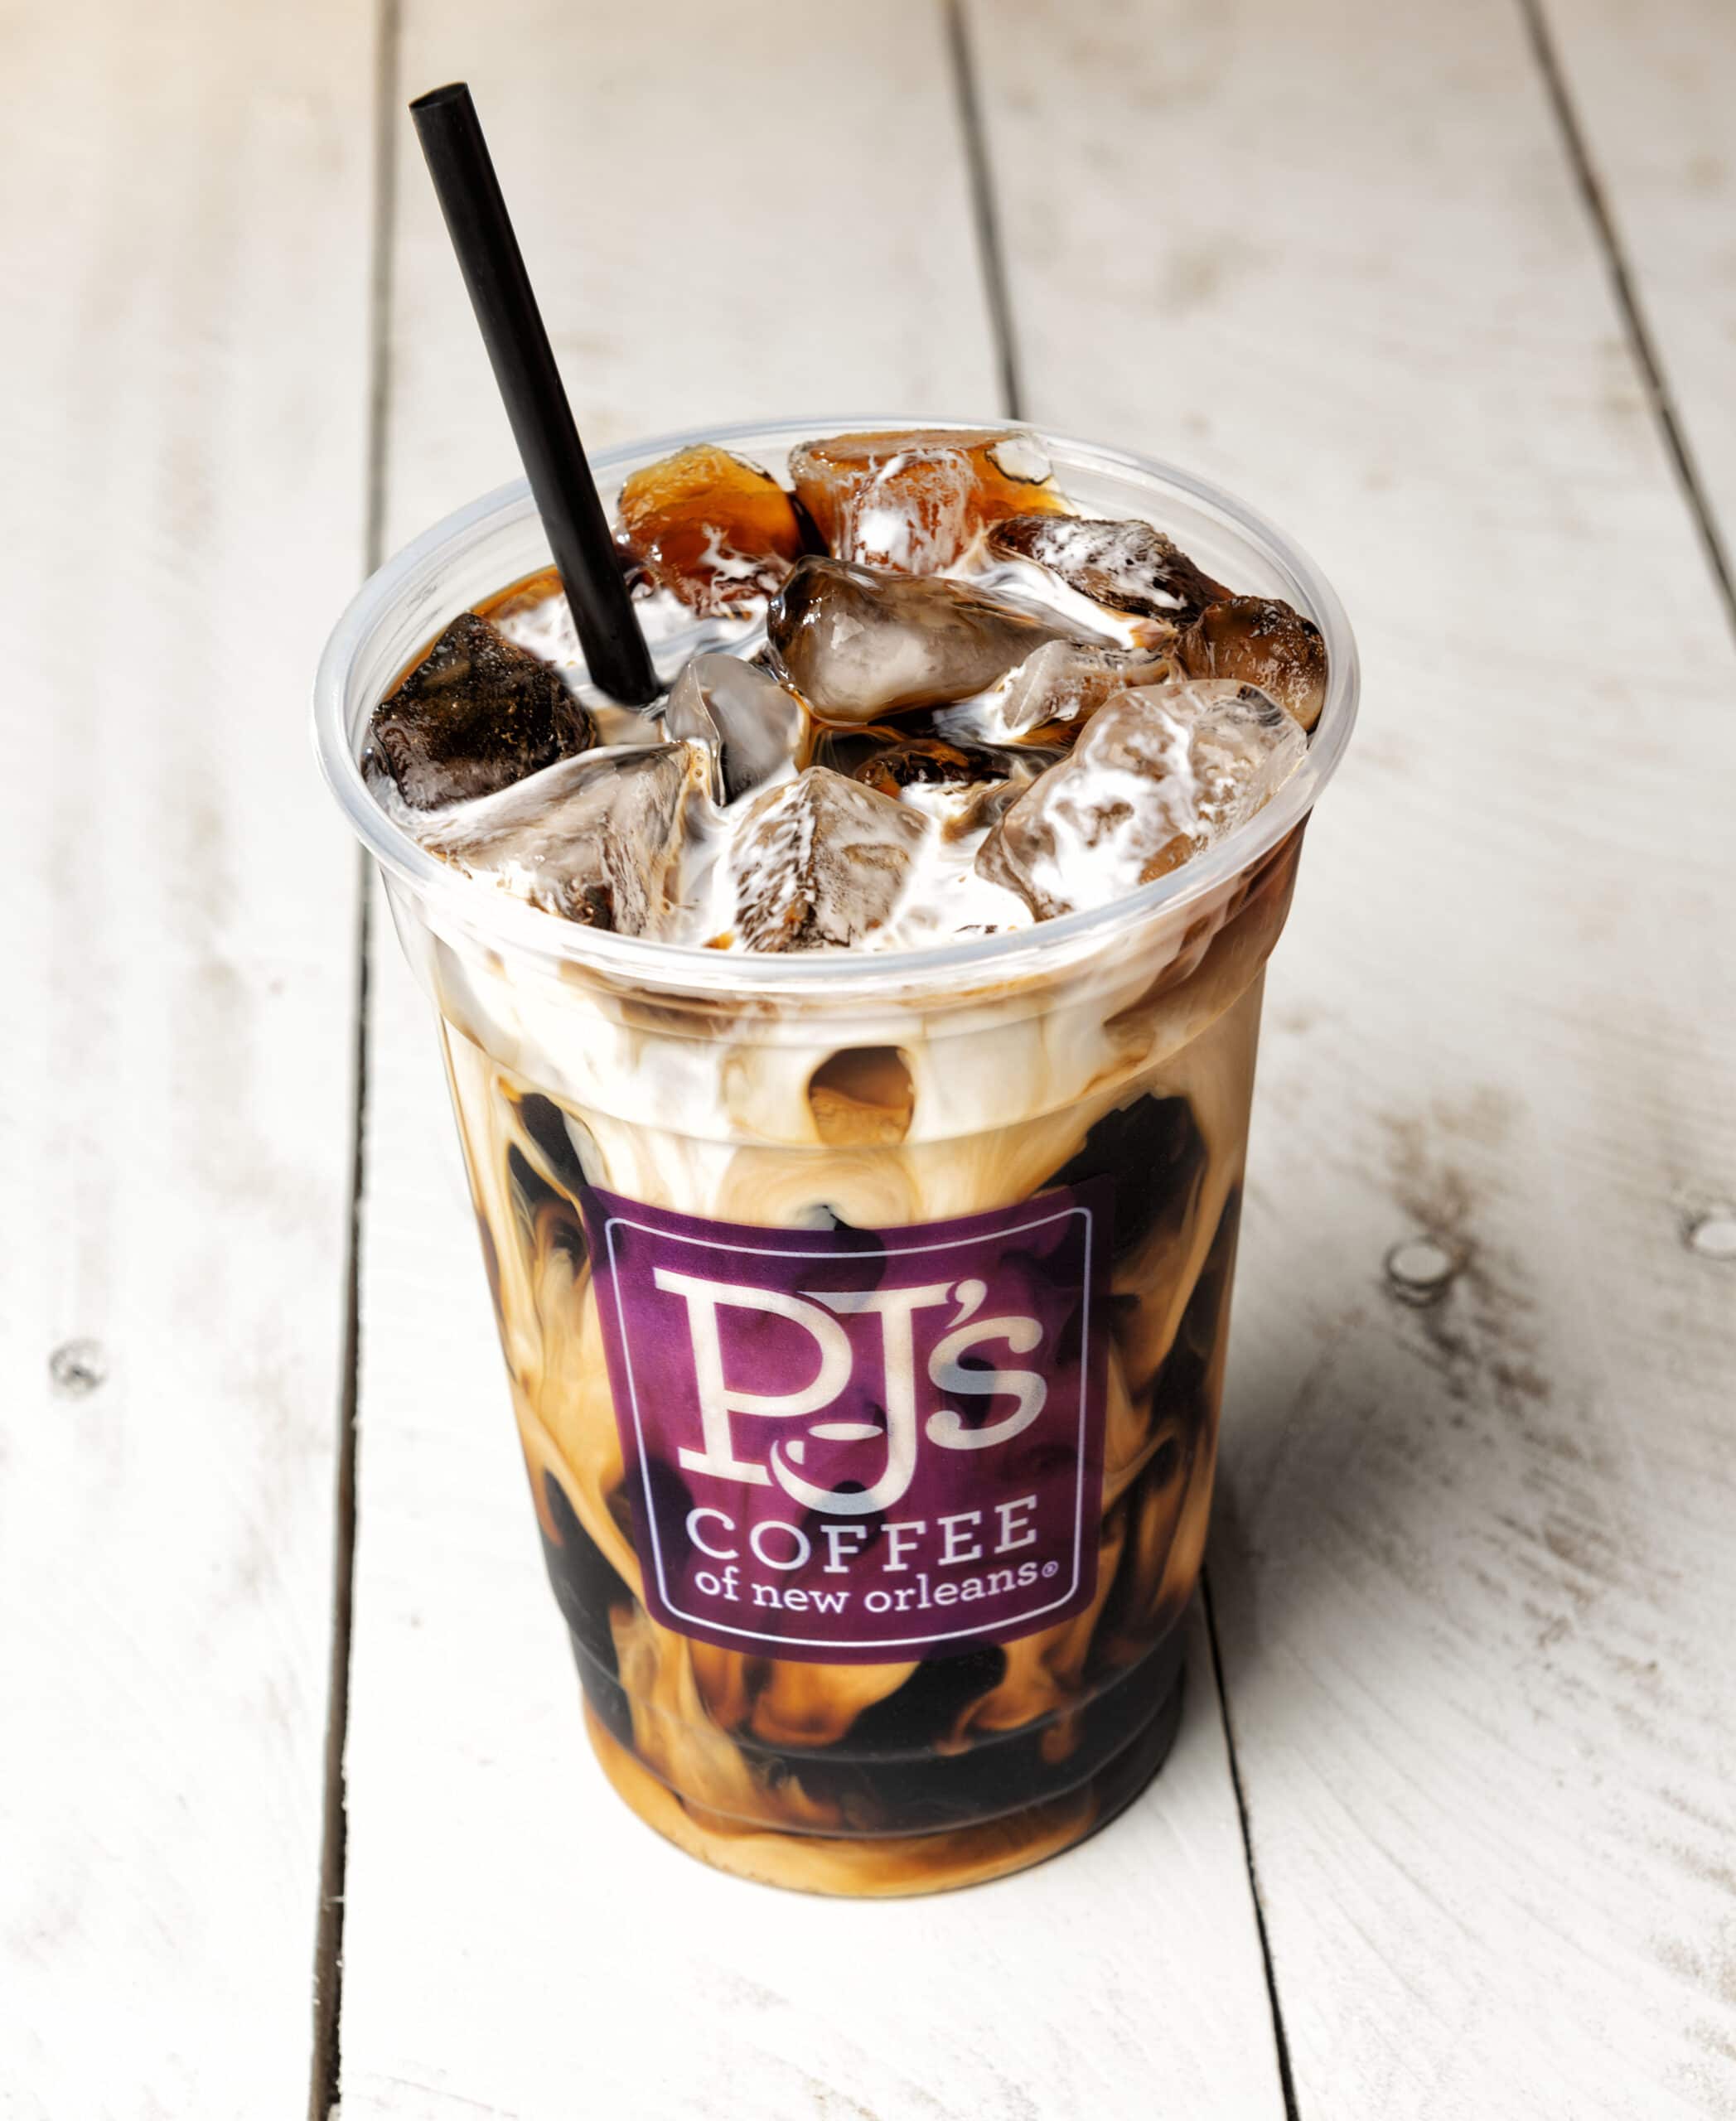 National Coffee day at PJ's